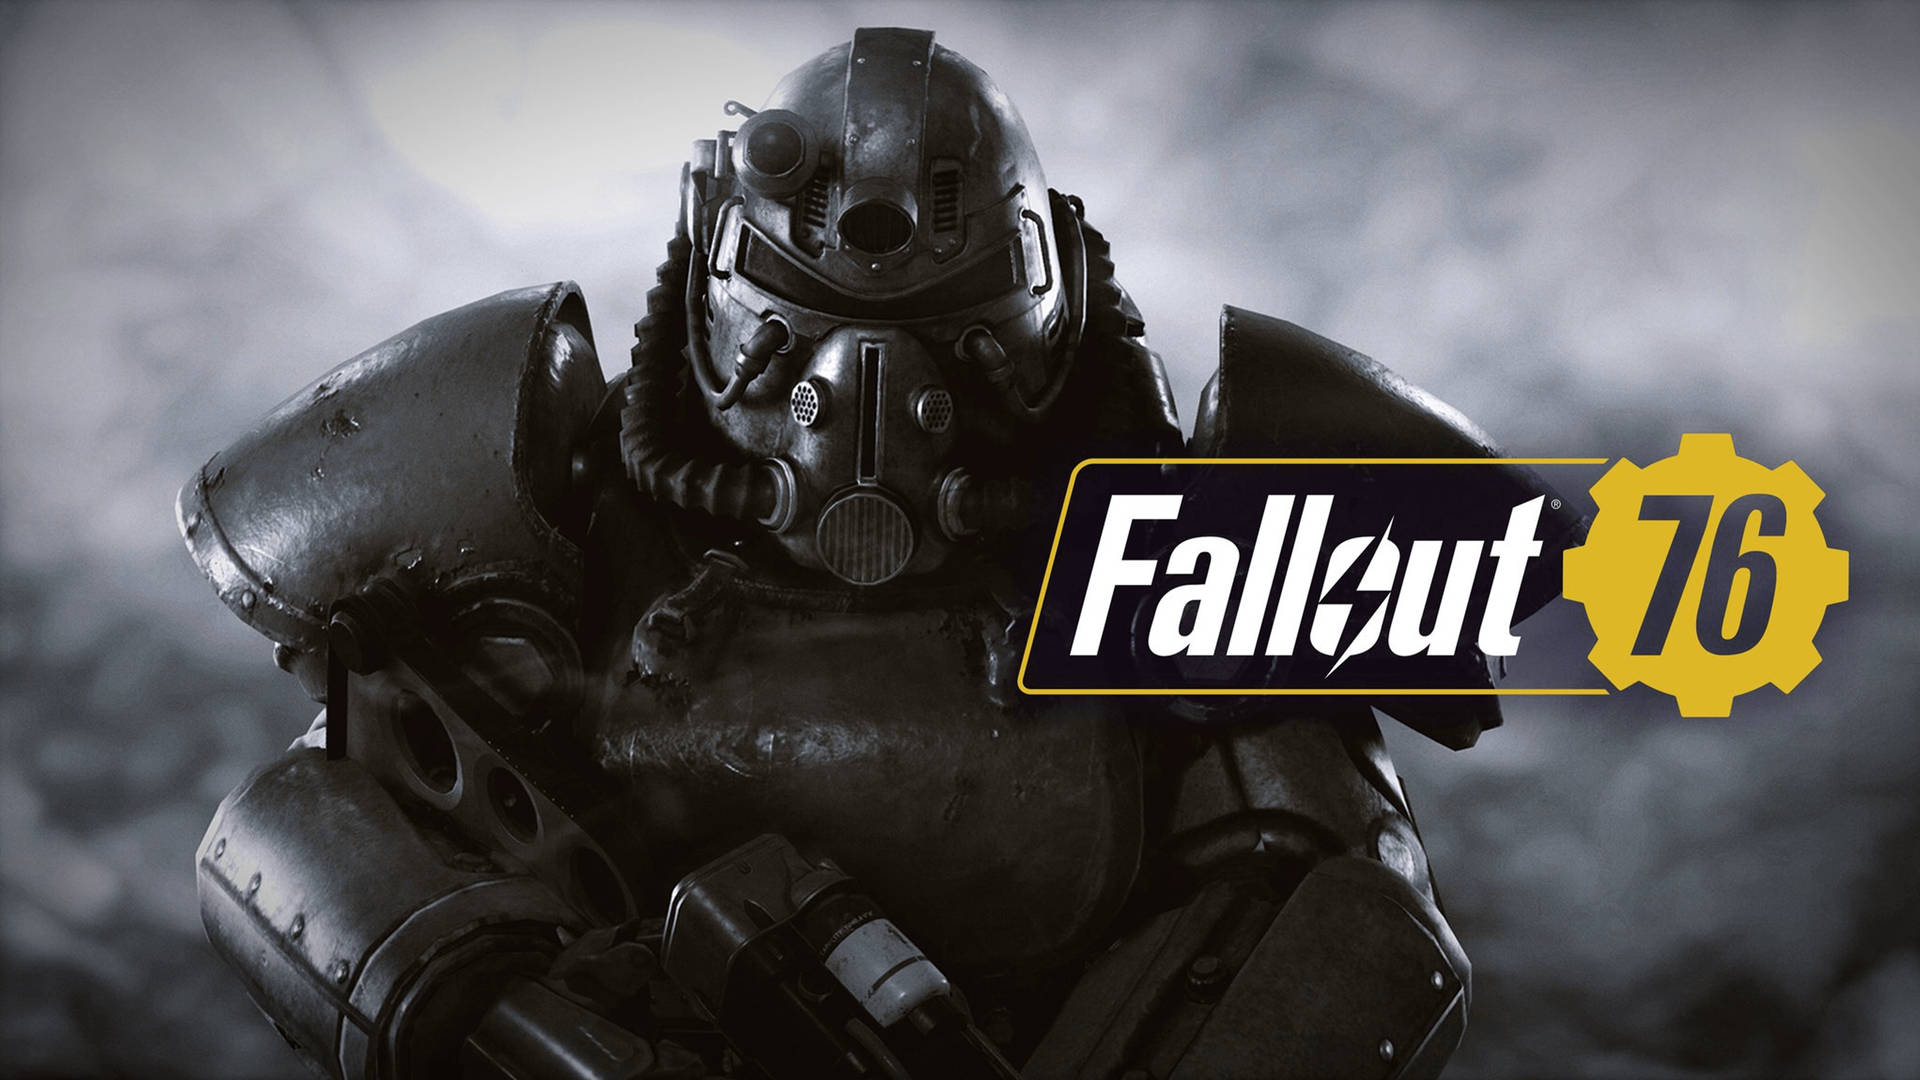 Top 999+ Fallout 76 Wallpaper Full HD, 4K✅Free to Use